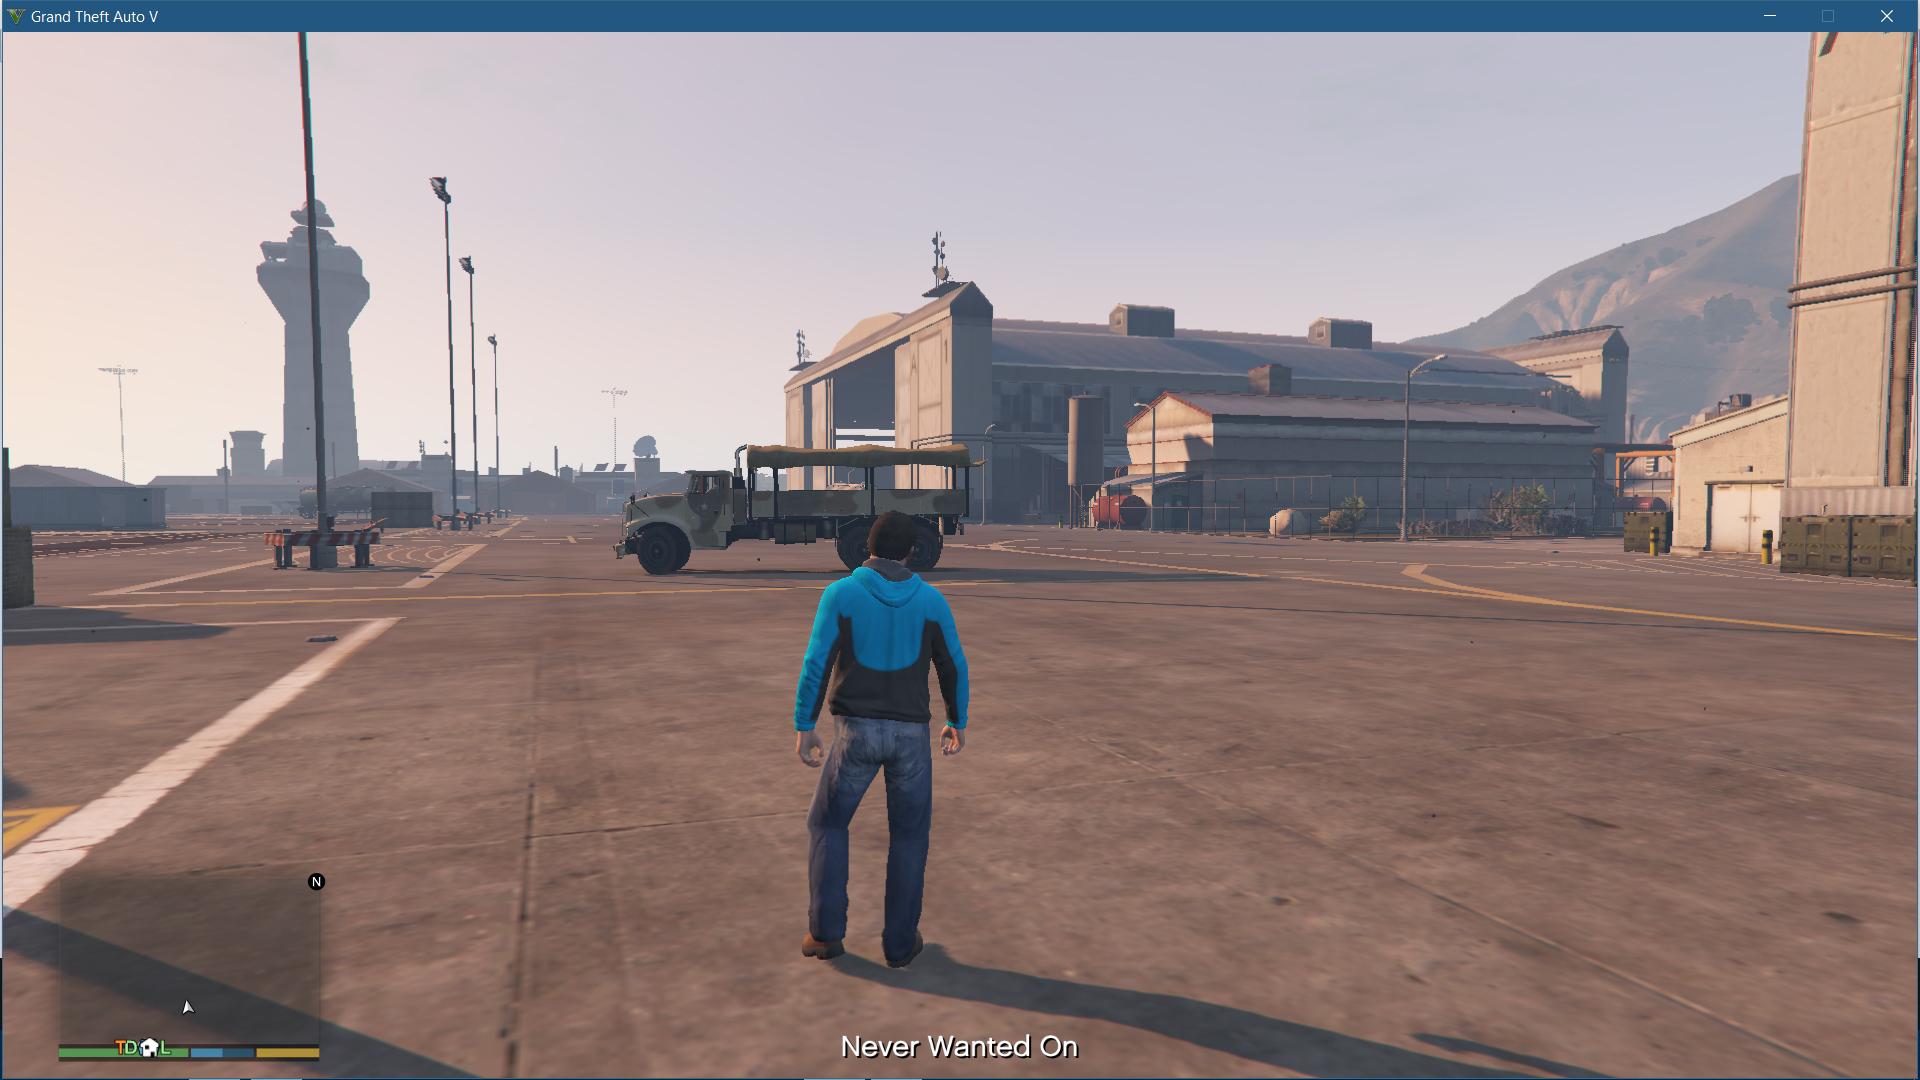 gta v without wanted level